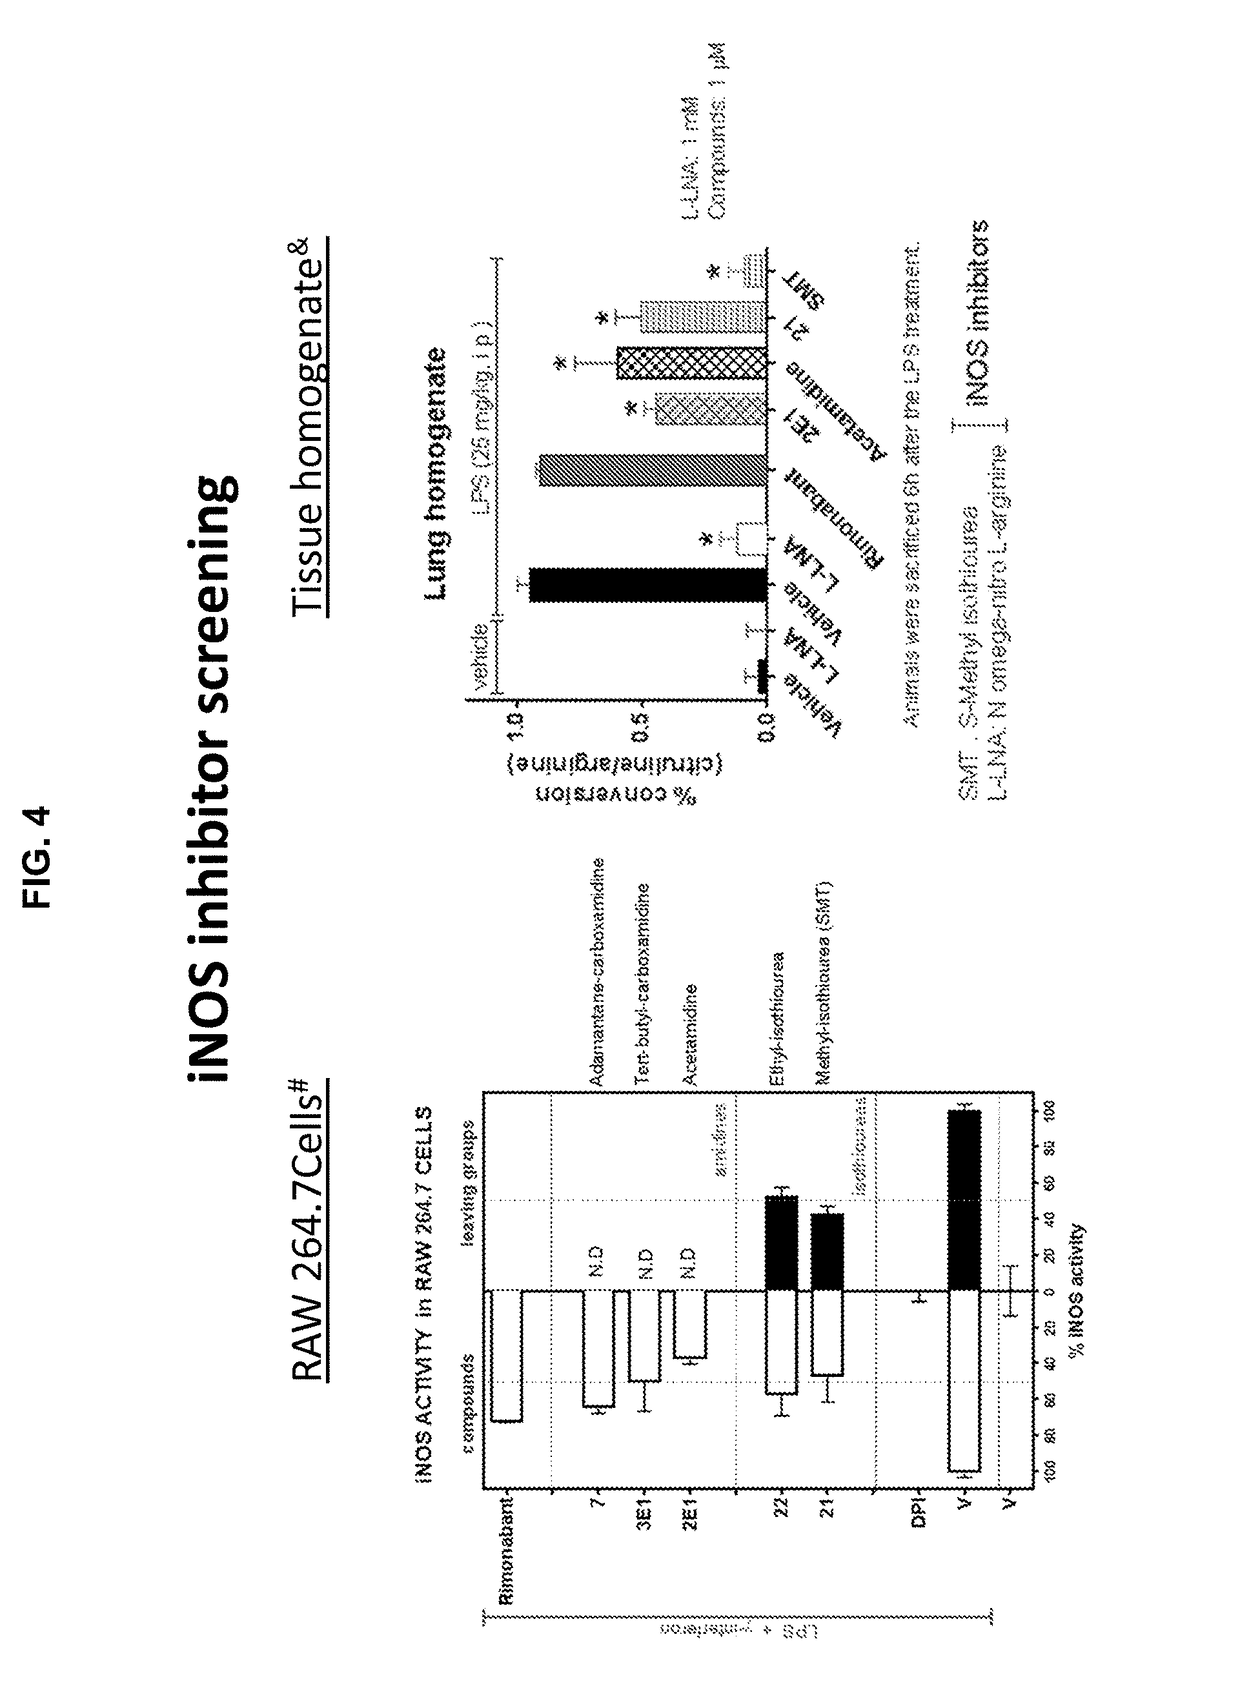 Cannabinoid receptor mediating compounds